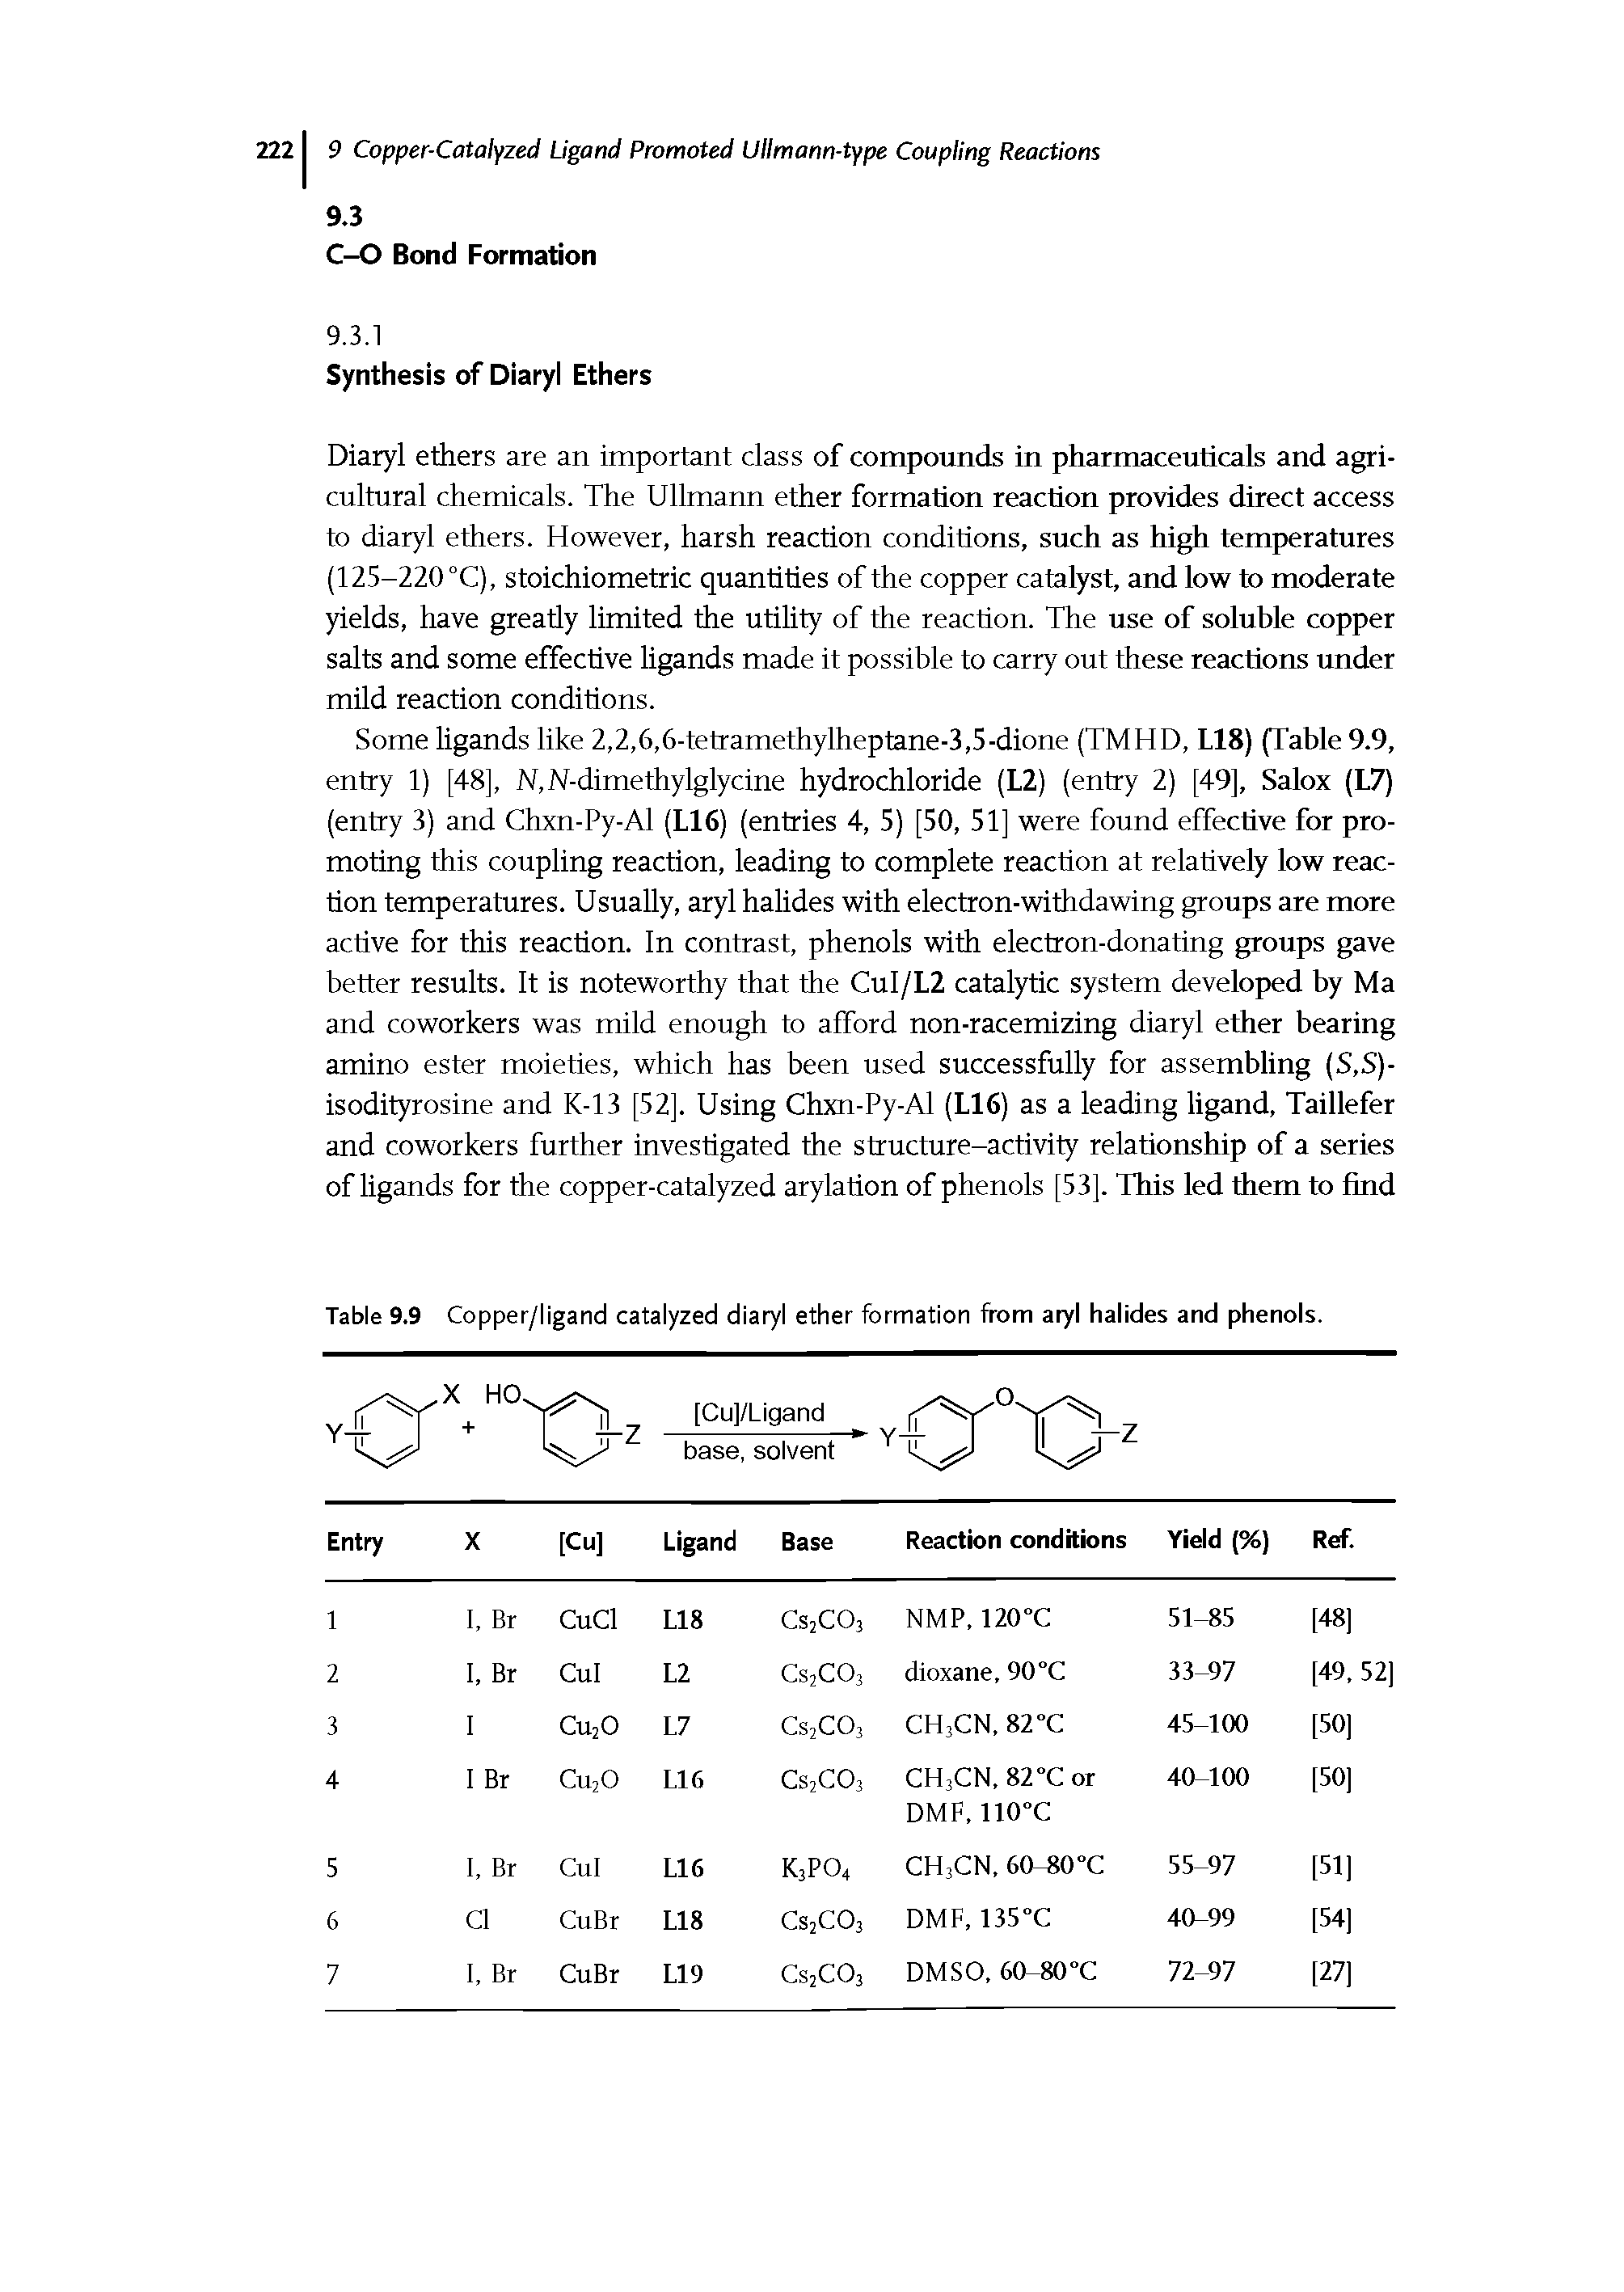 Table 9.9 Copper/ligand catalyzed diaryl ether formation from aryl halides and phenols.